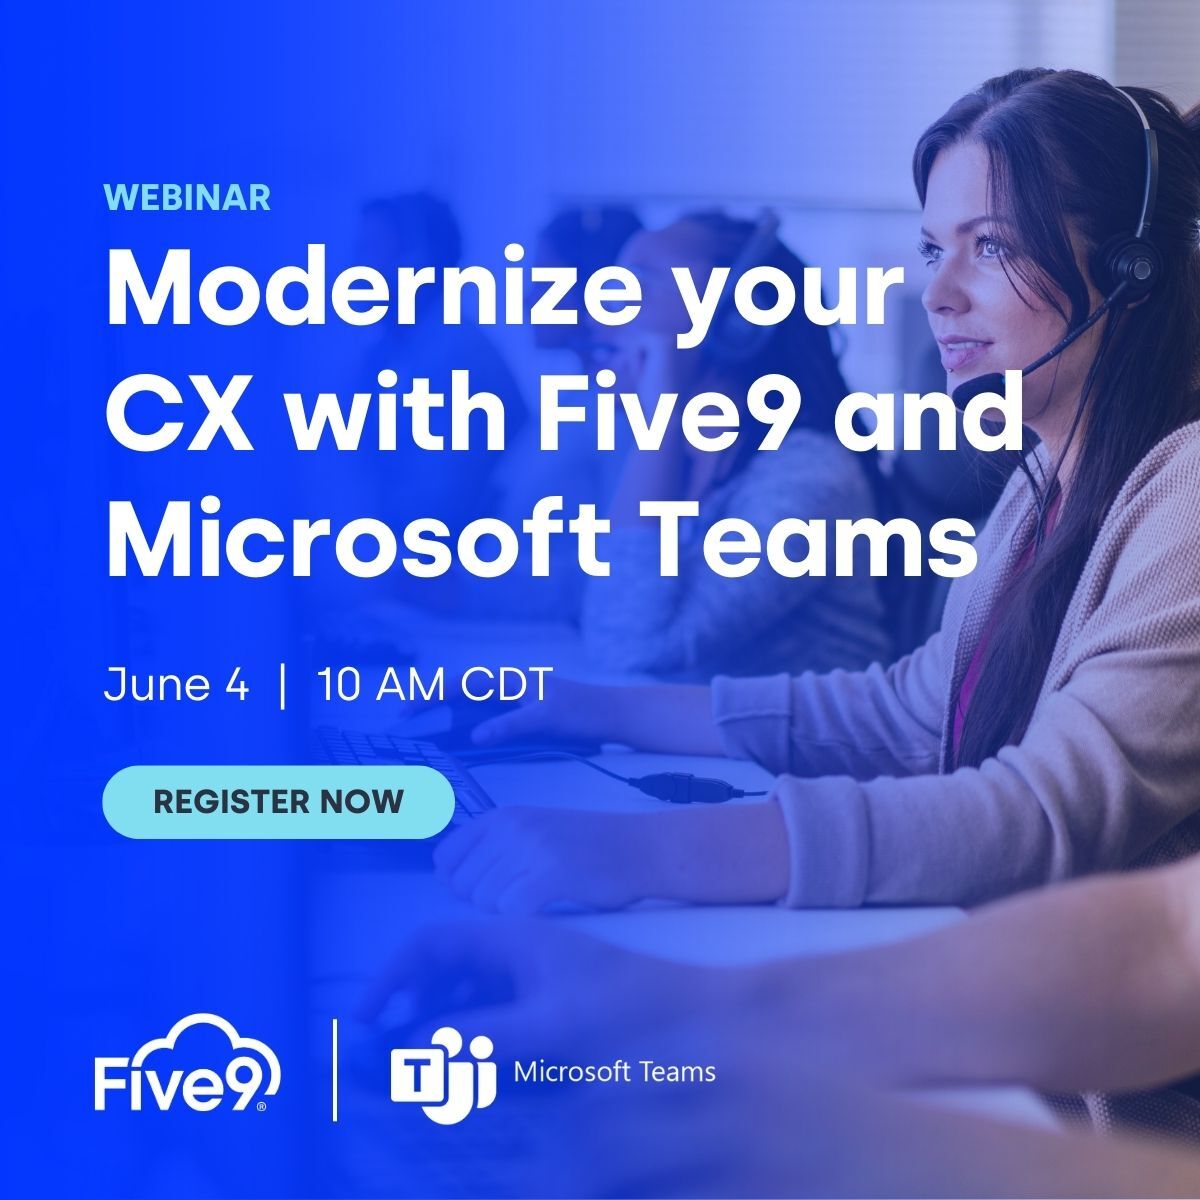 Discover the power of modernizing your CX with Five9 and @Microsoft Teams. Learn how integrating these platforms can boost agent productivity and enhance customer satisfaction. 📈 Register now: spr.ly/6010ejaq6 #PartnerPowered #CX